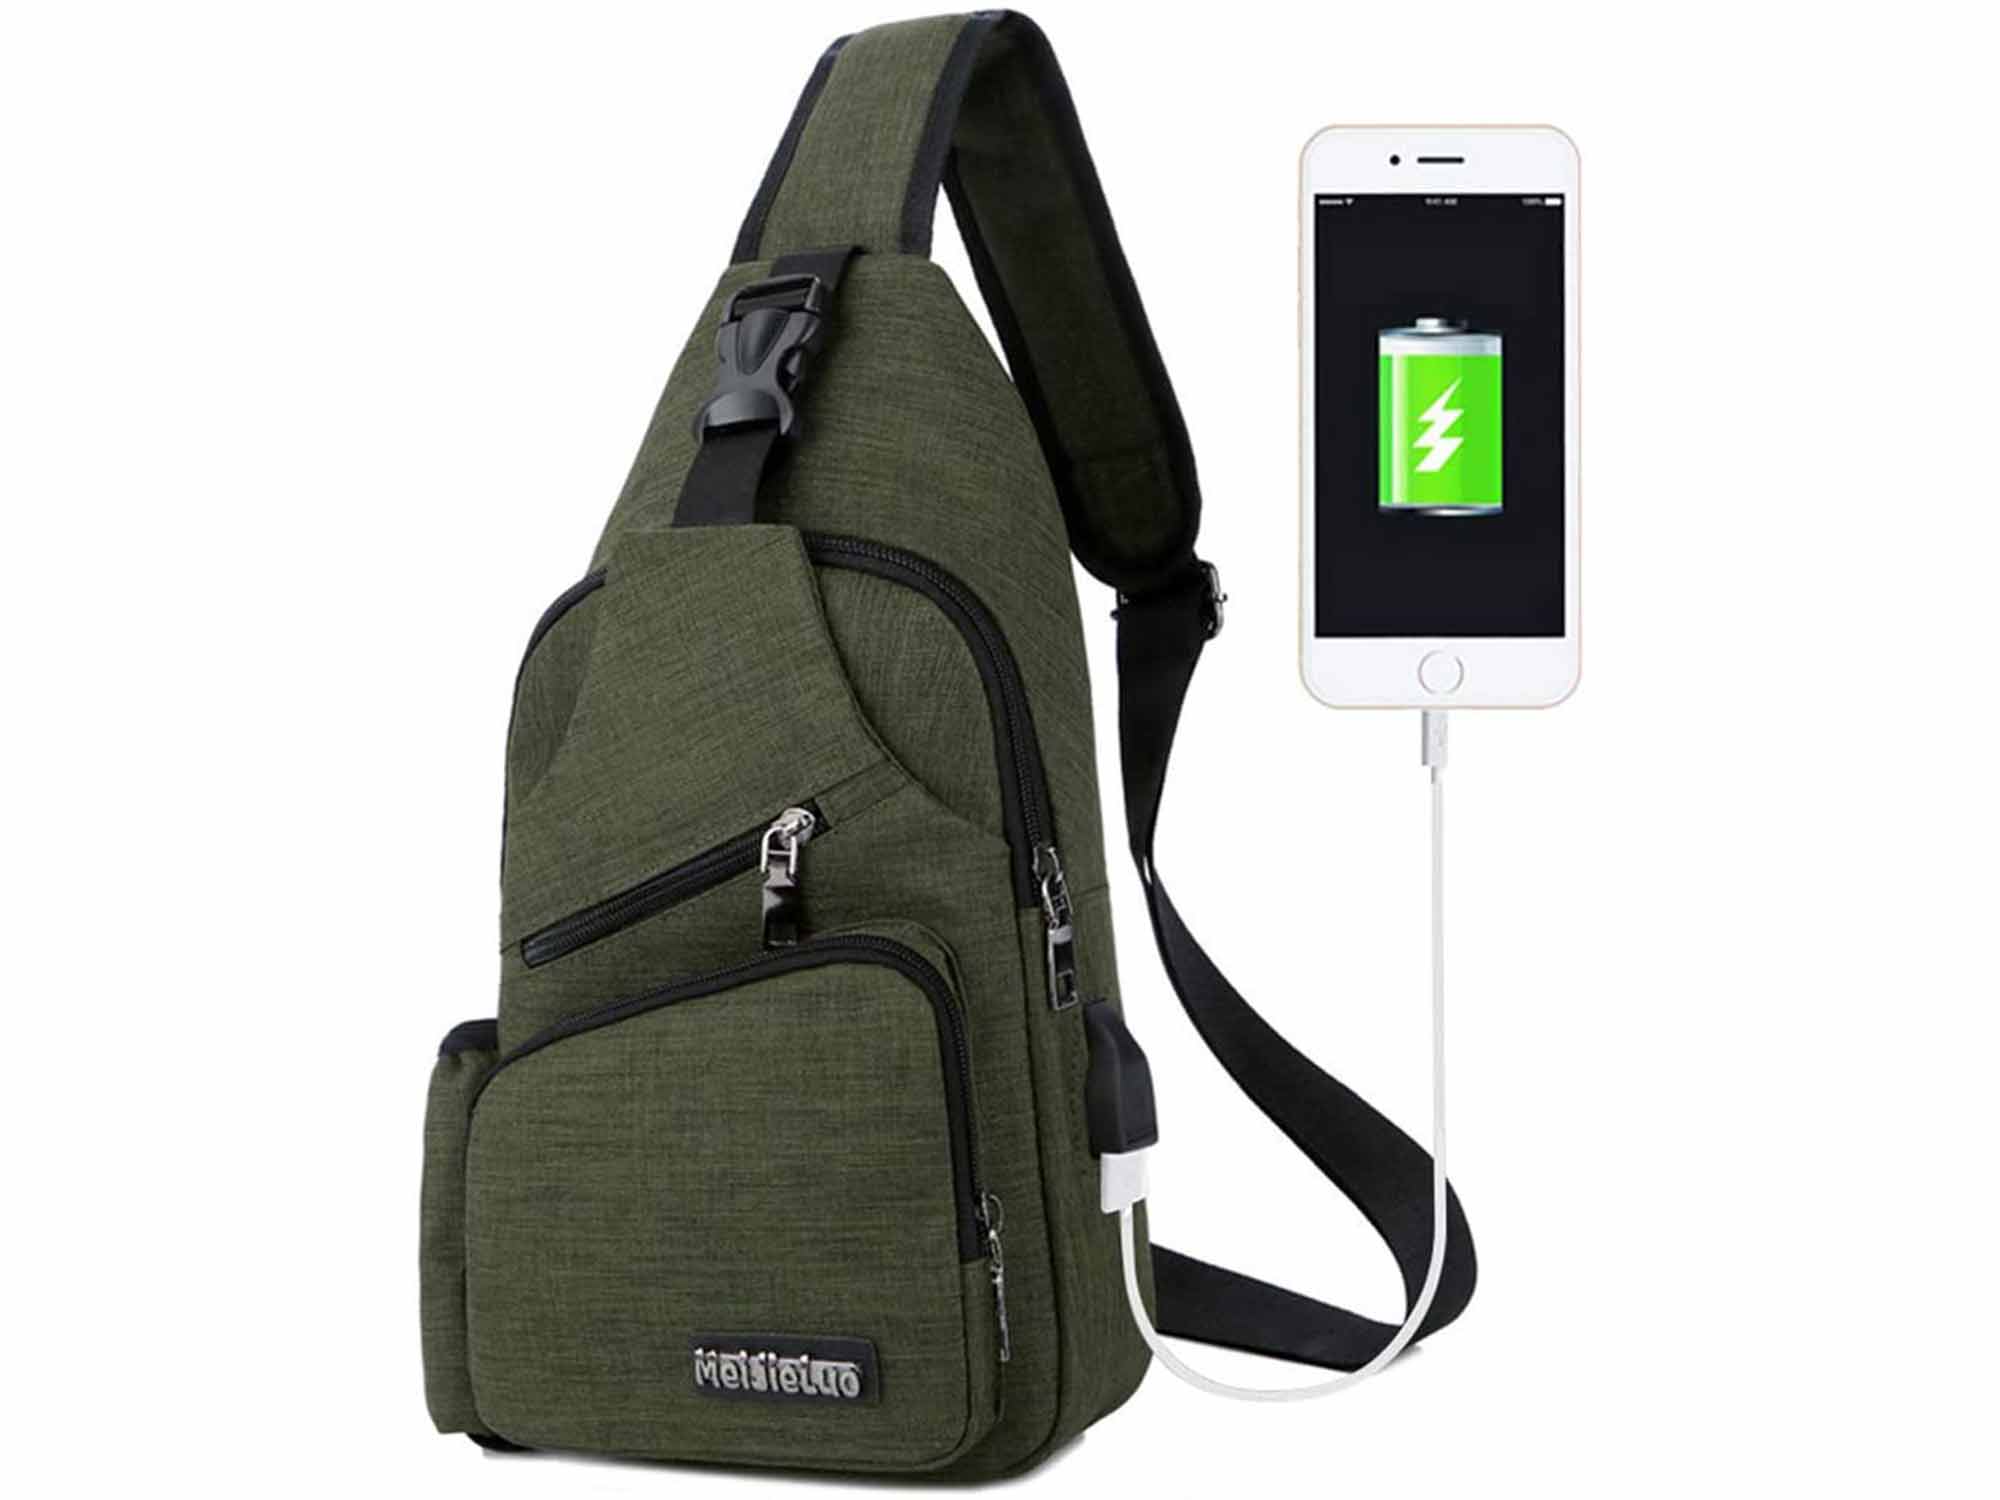 Bag with charger